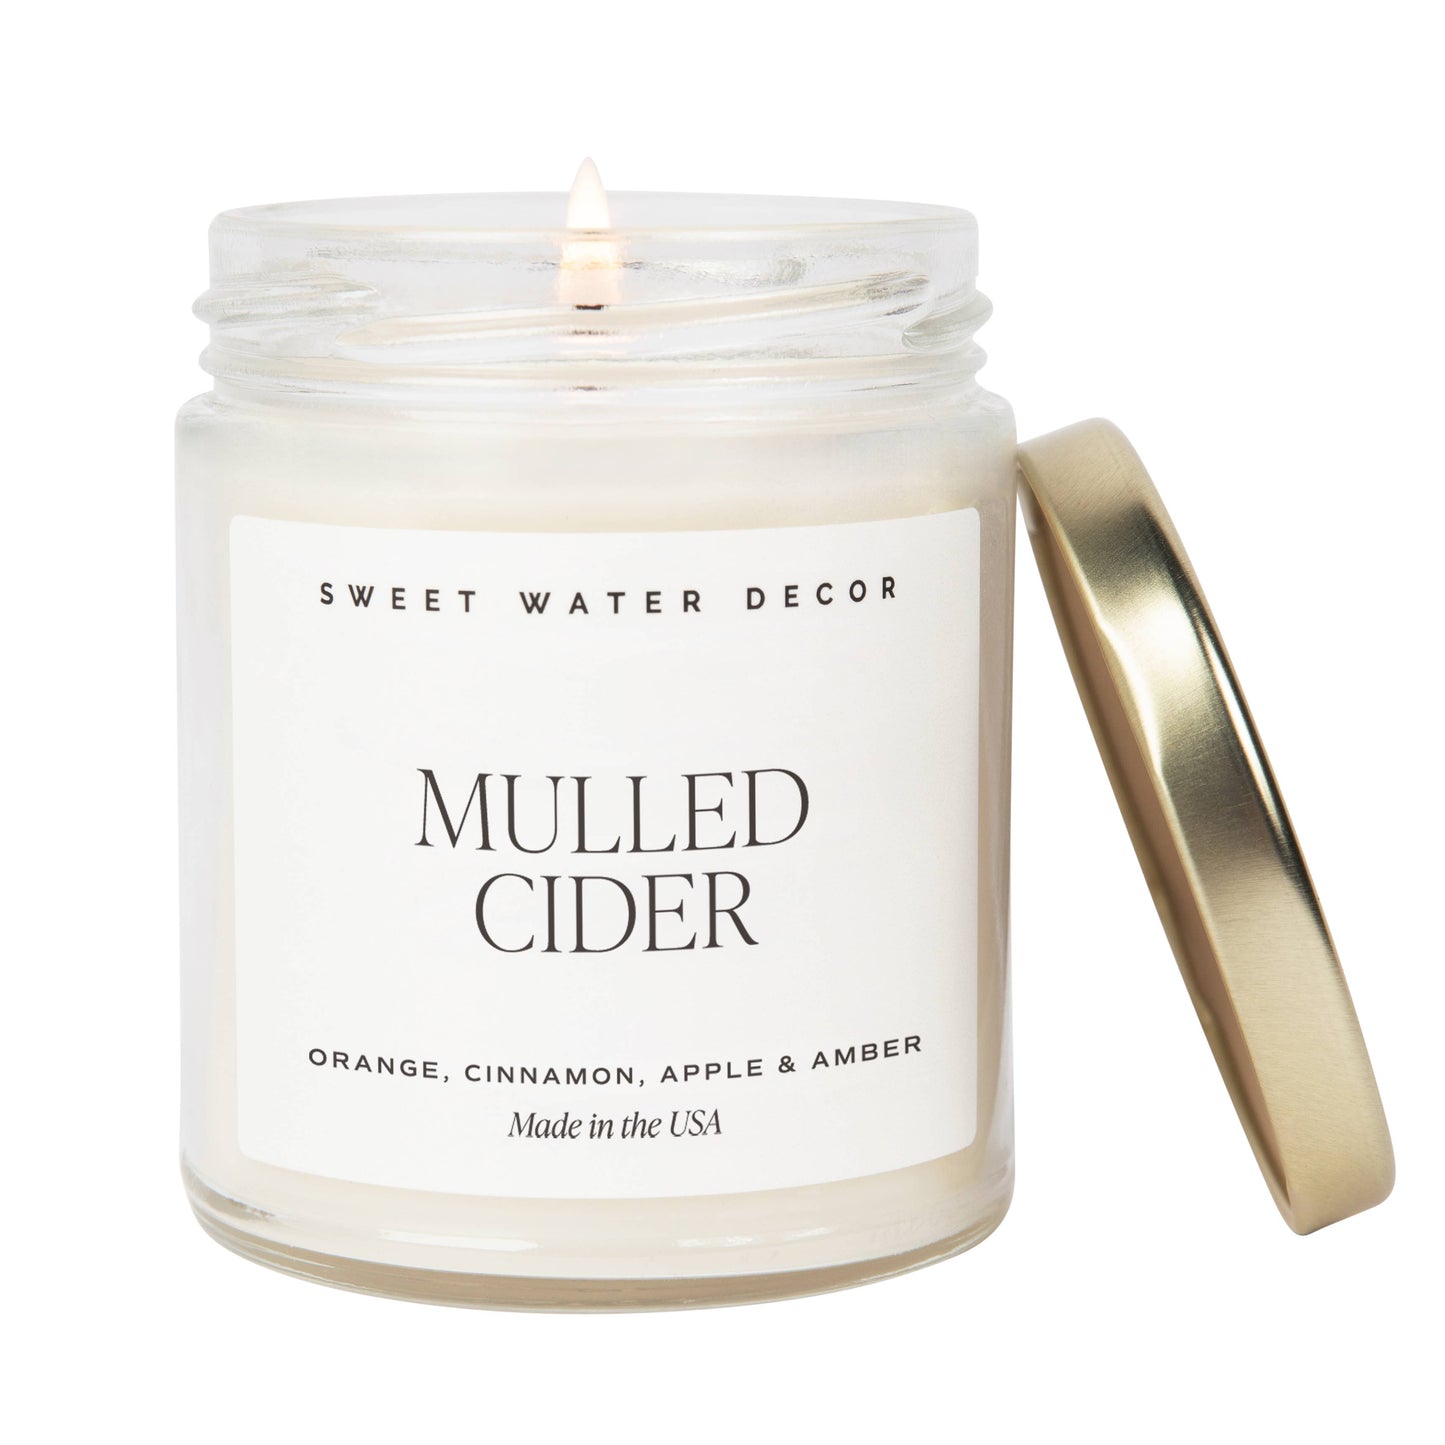 *NEW* Mulled Cider 9 oz Soy Candle